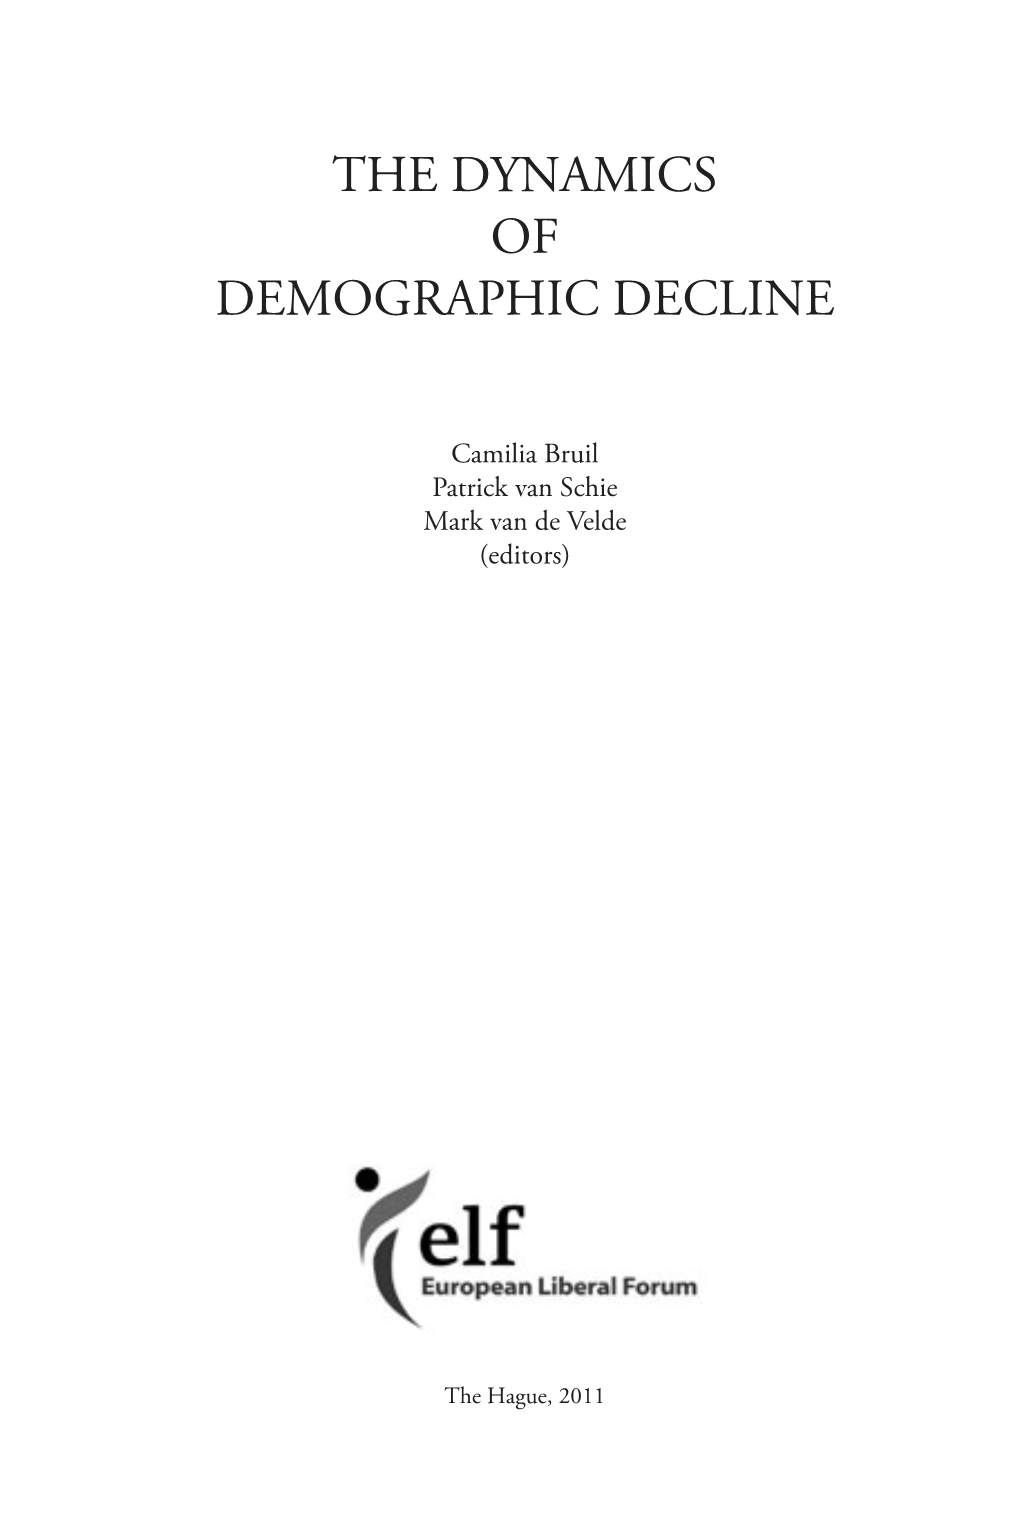 The Dynamics of Demographic Decline